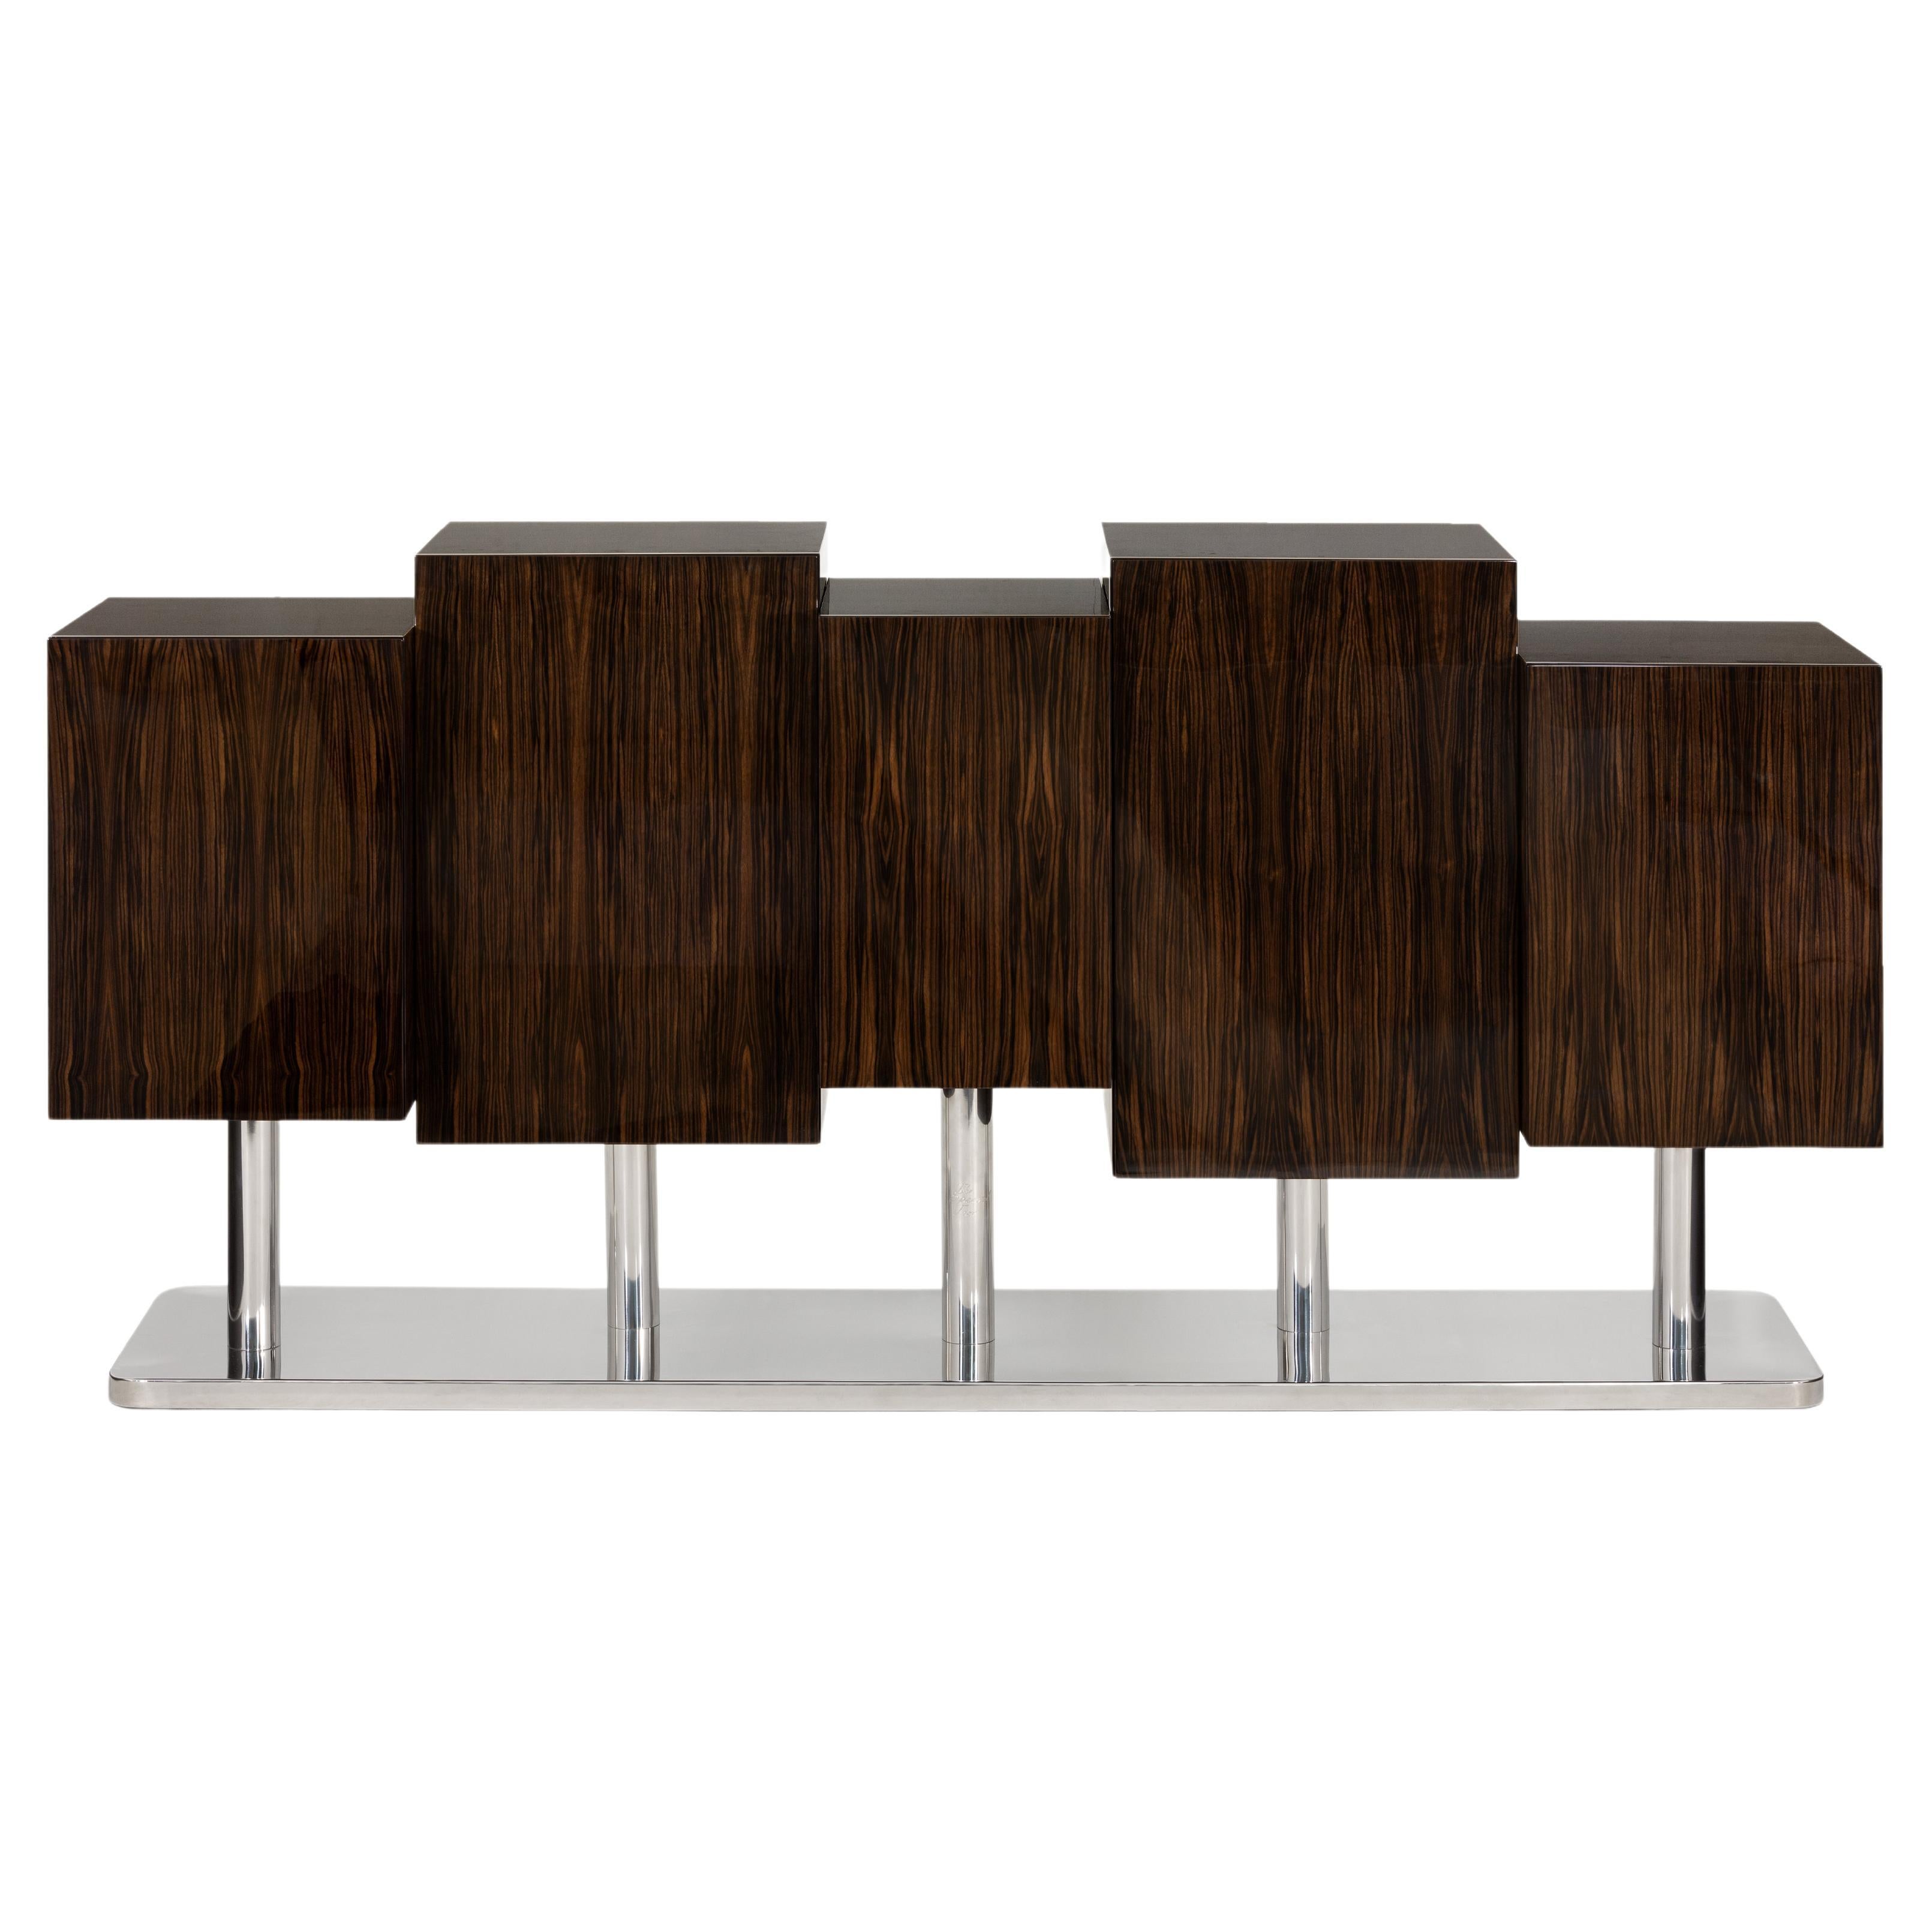 The Special Tree Sideboard by InsidherLand